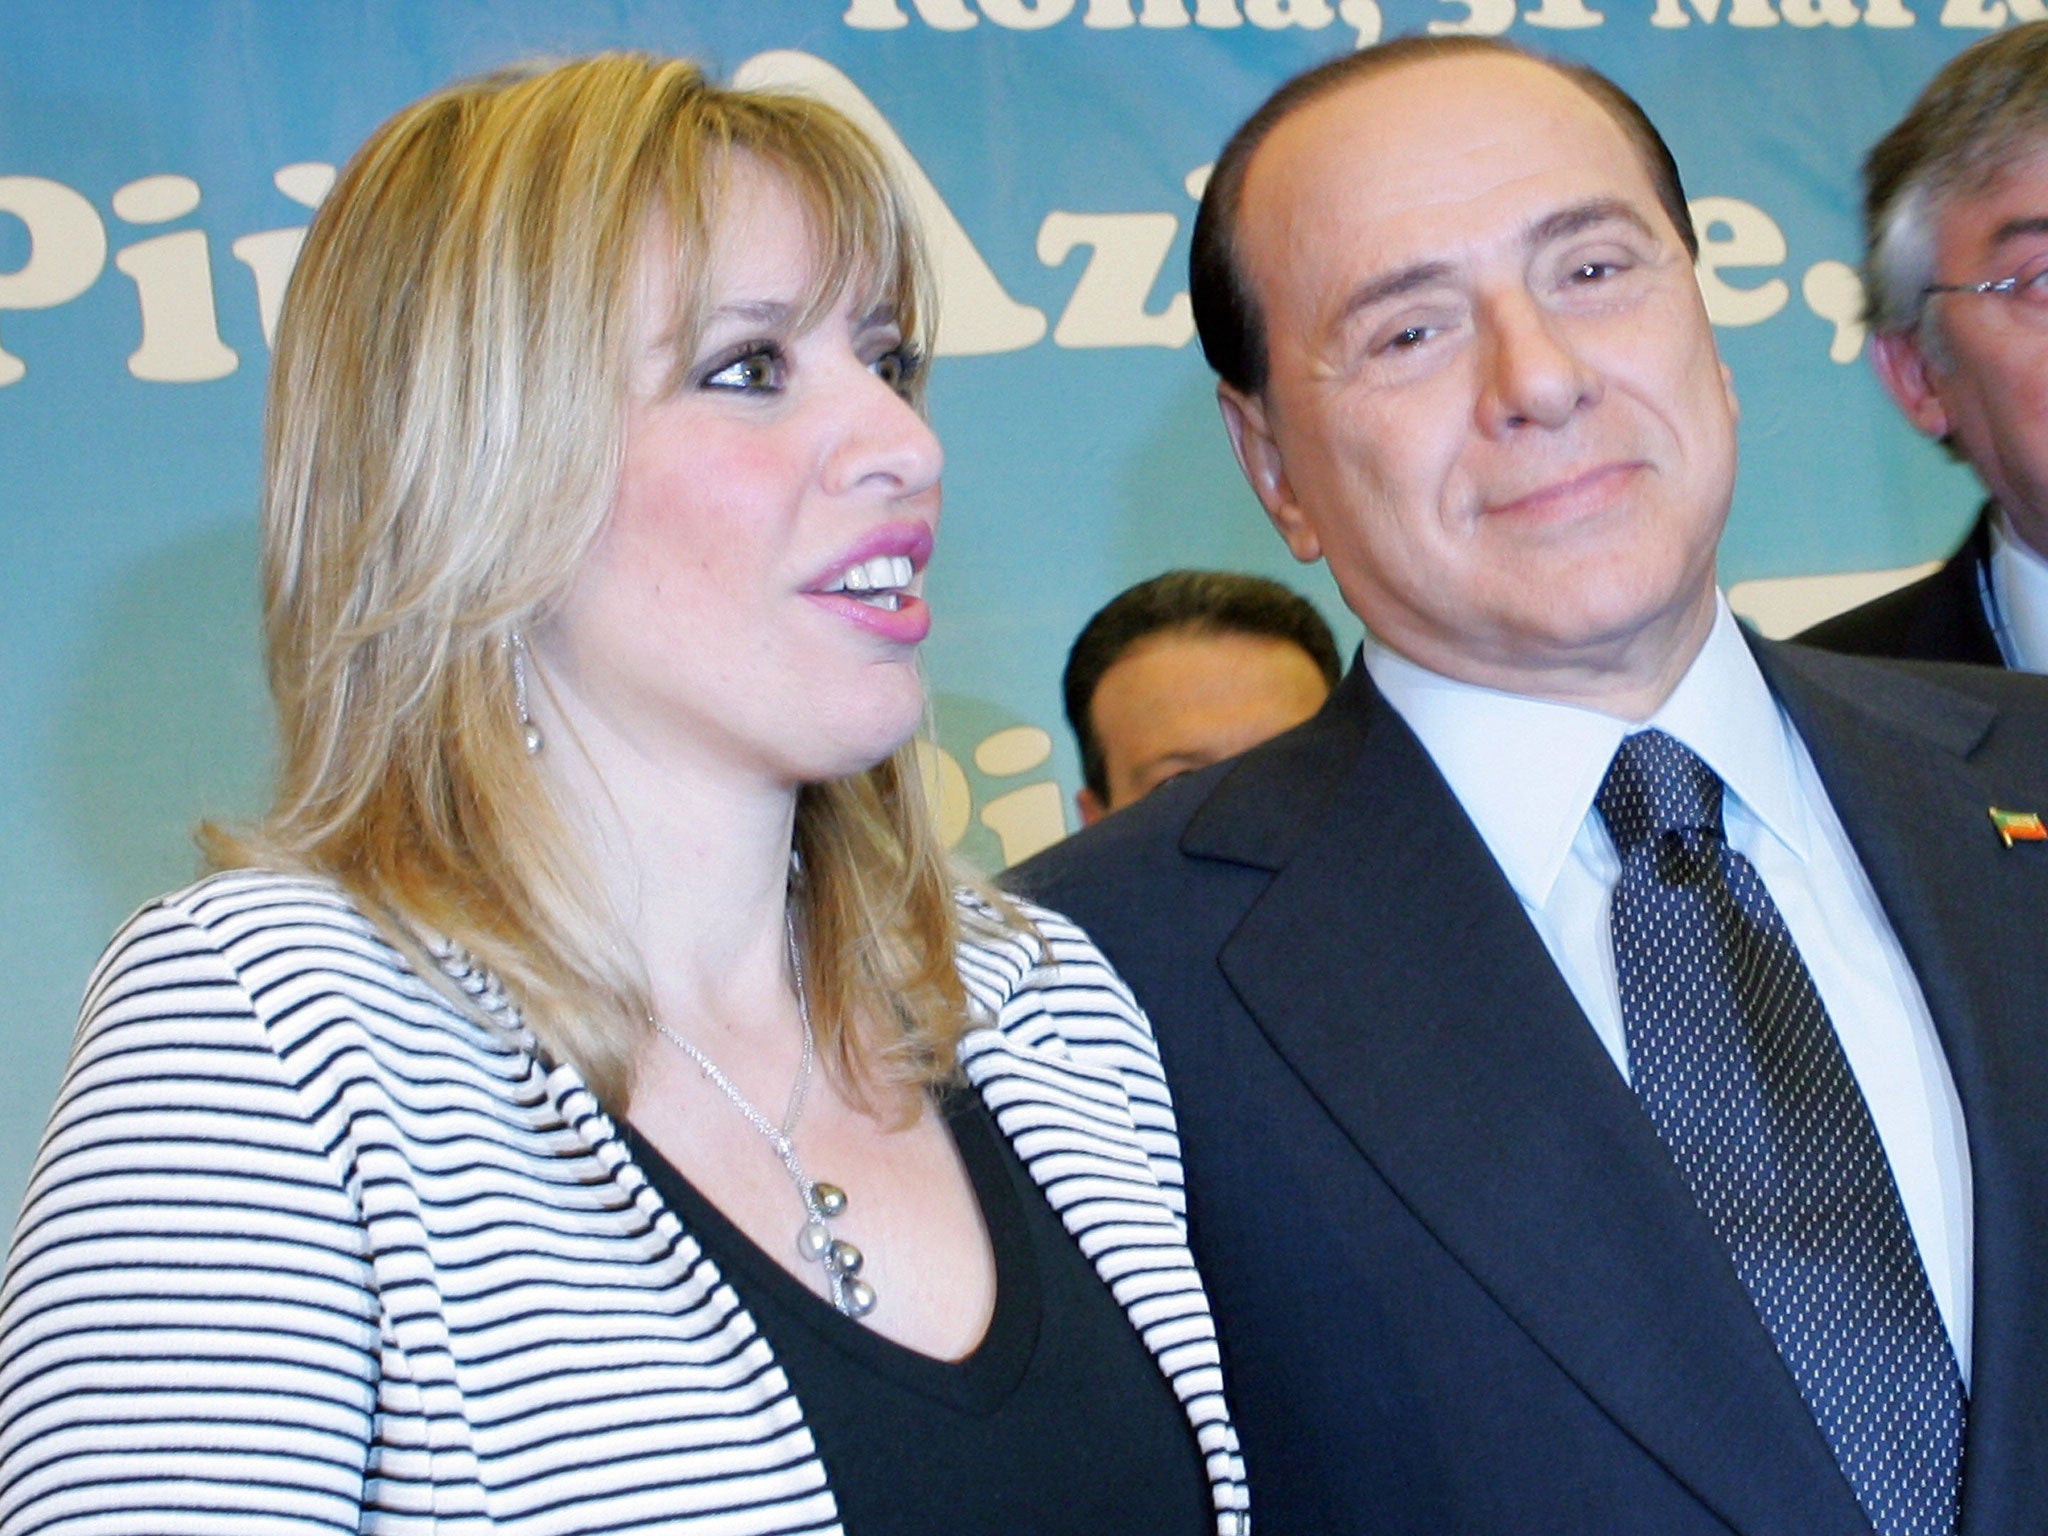 Mussolini S Grand Daughter Alessandra Caught Up In Rome Underage Images, Photos, Reviews